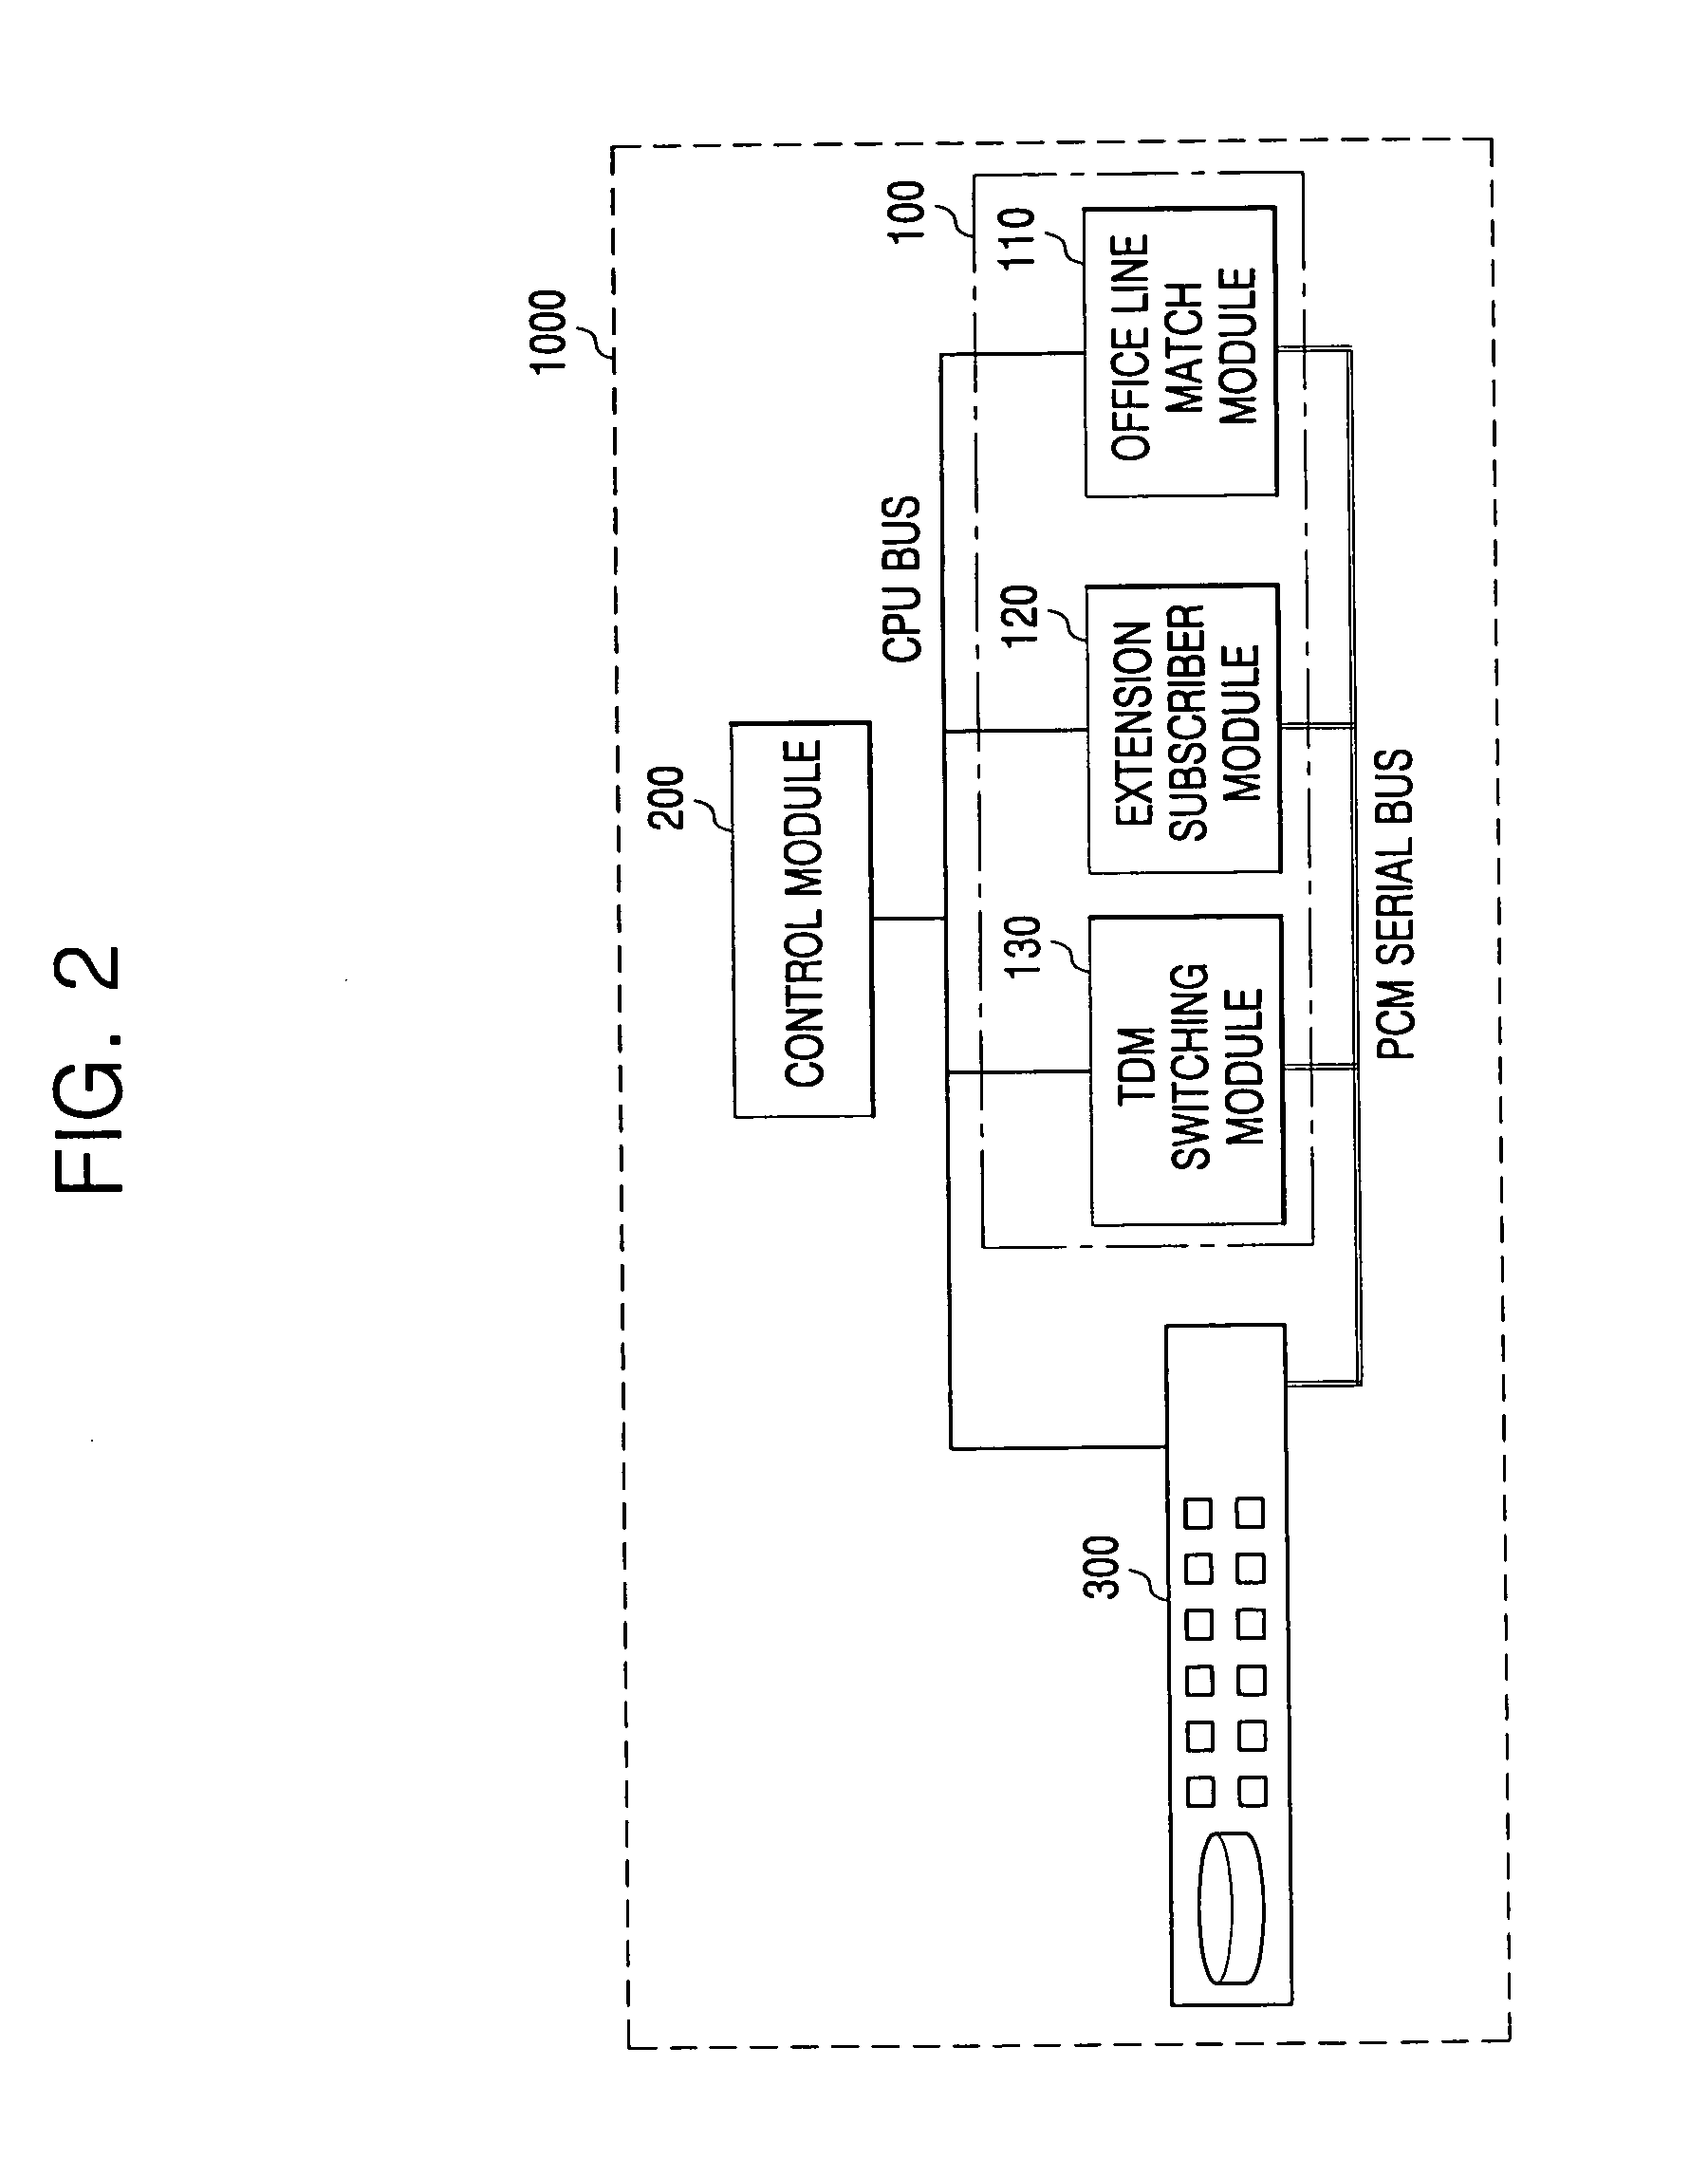 Processing session initiation protocol signaling in voice/data integrated switching system